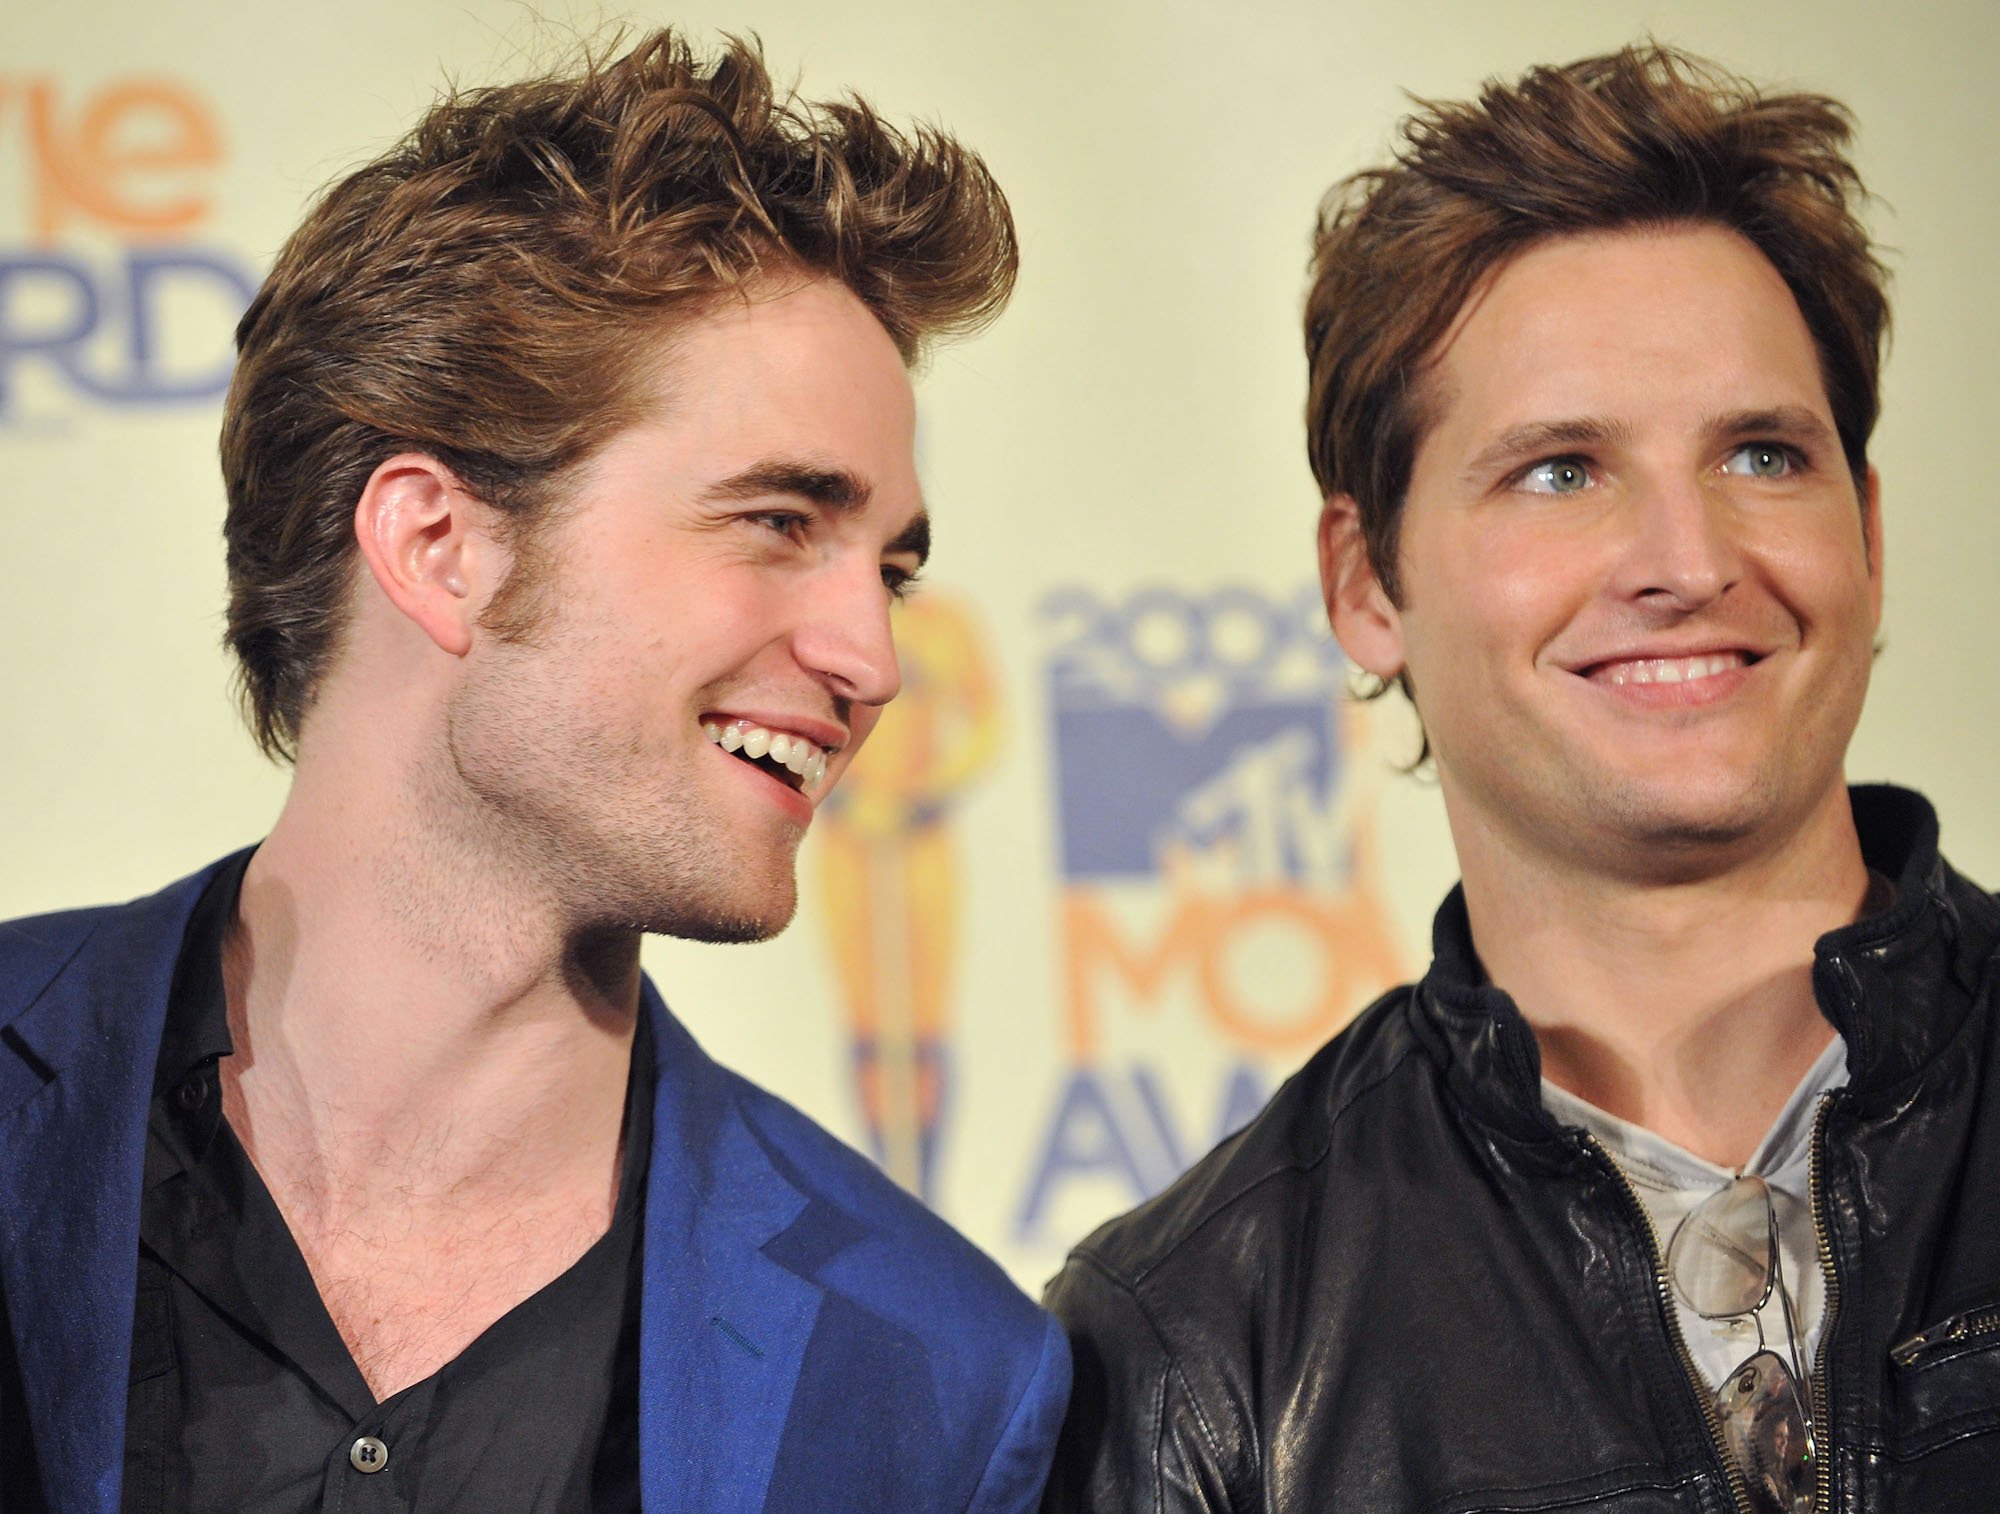 Robert Pattinson and Peter Facinelli at the 2009 MTV Movie Awards at Gibson Amphitheatre on May 31, 2009.